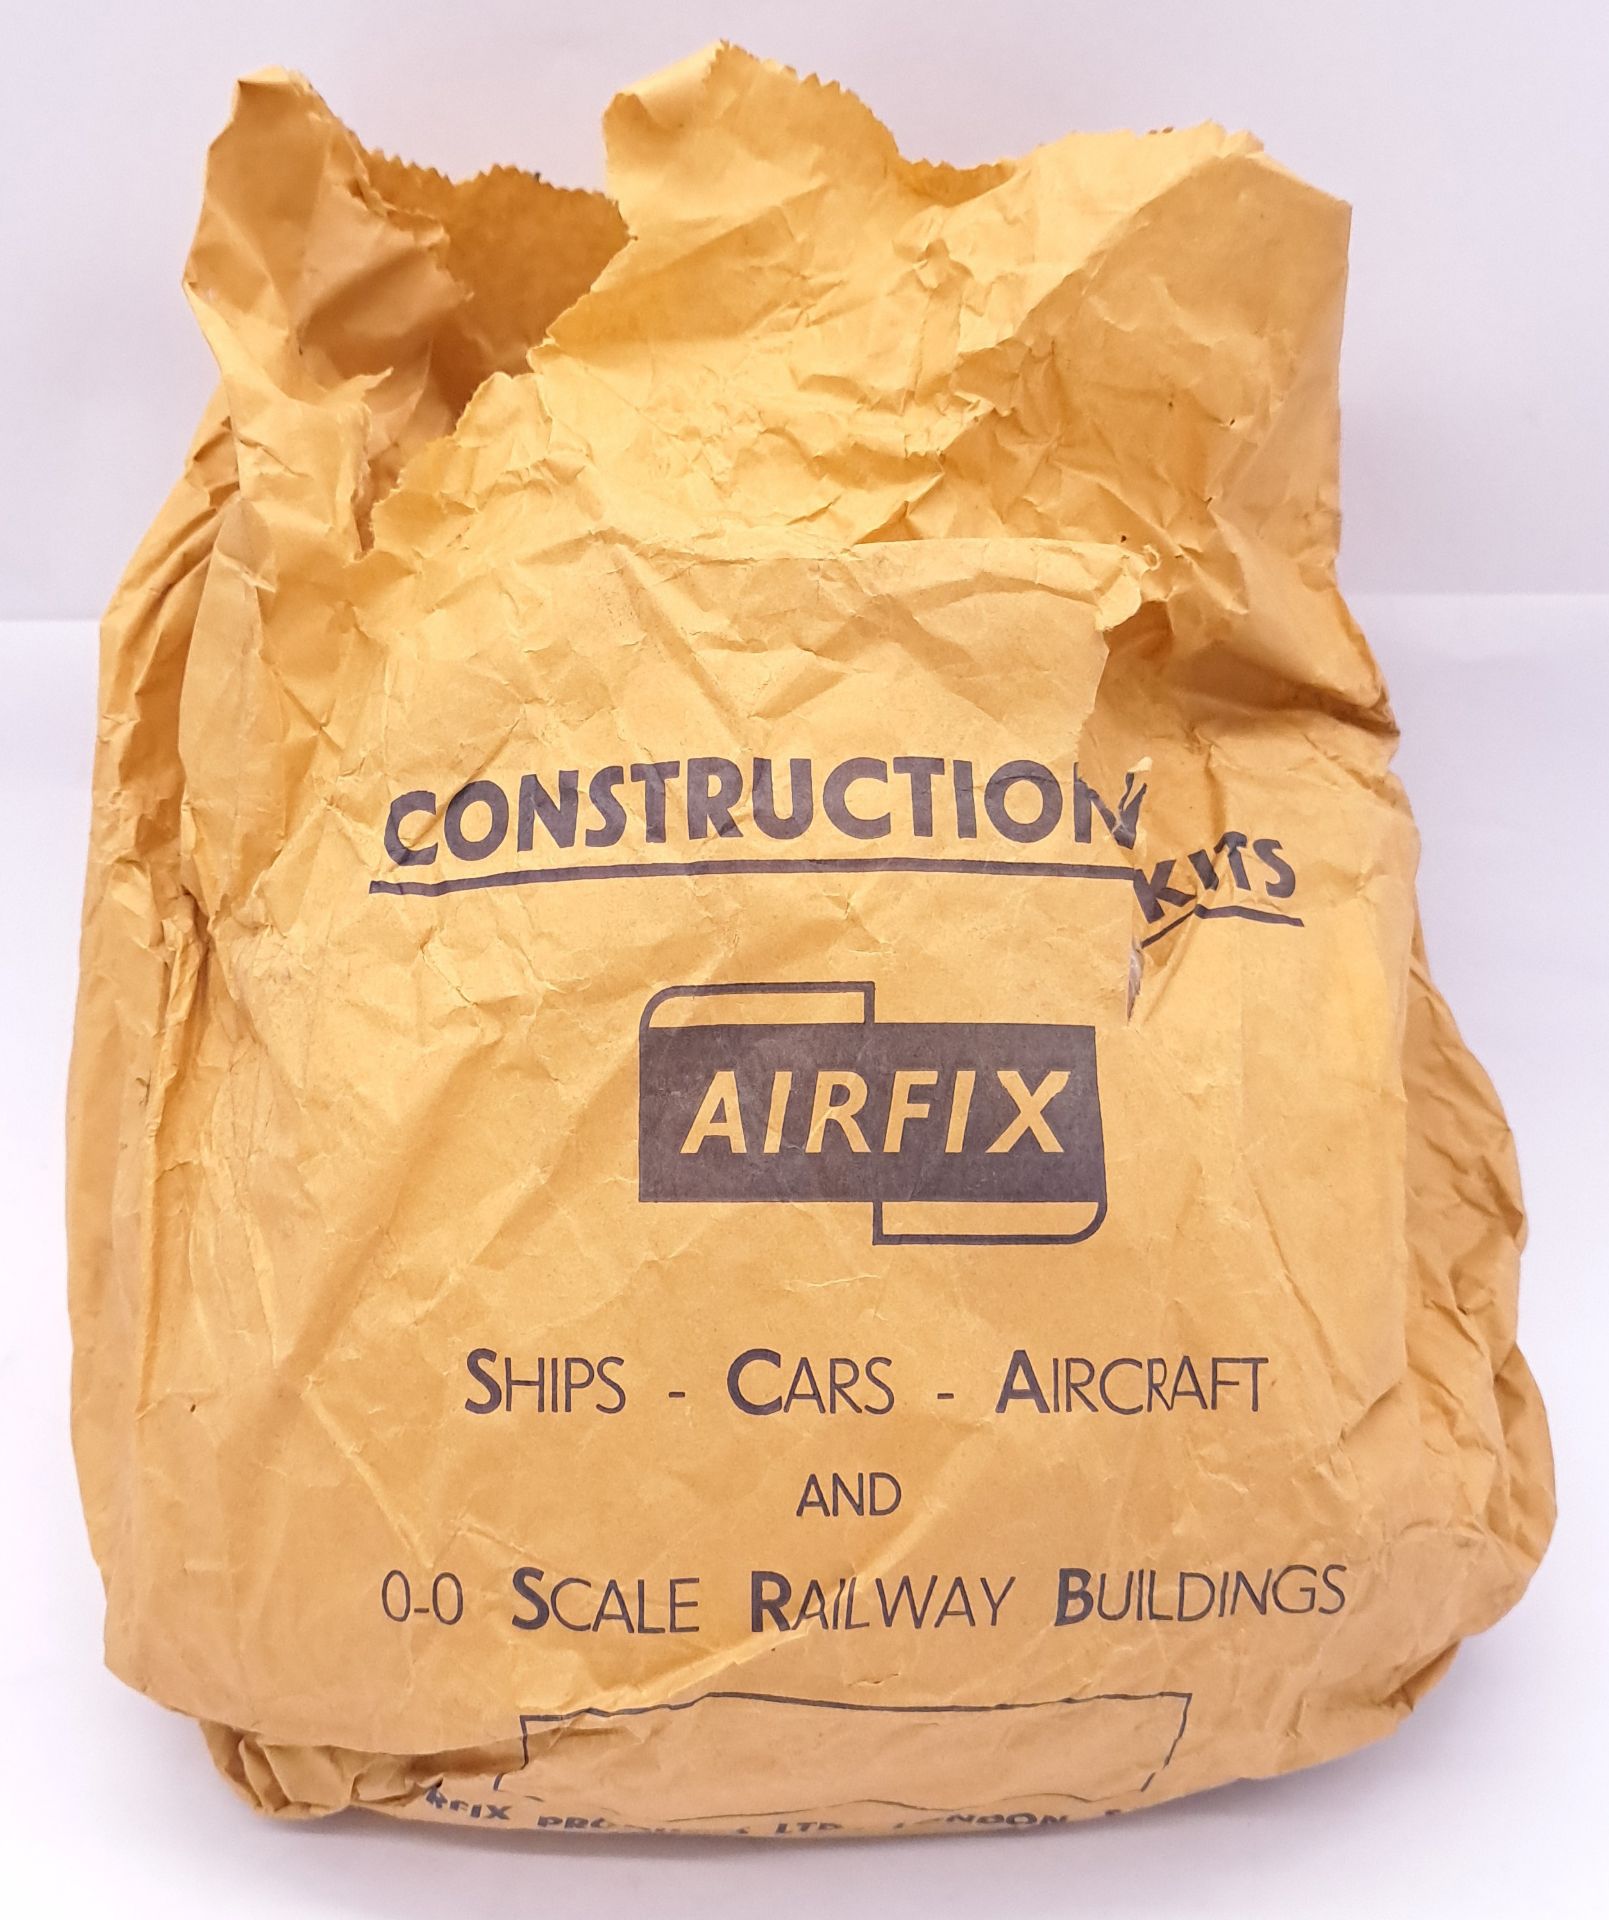 Airfix c1960’s ORIGINAL TRADE BAG complete with Bagged Type 3 “H.M.S Victory” Series 1 (Airfix Hi... - Image 3 of 7